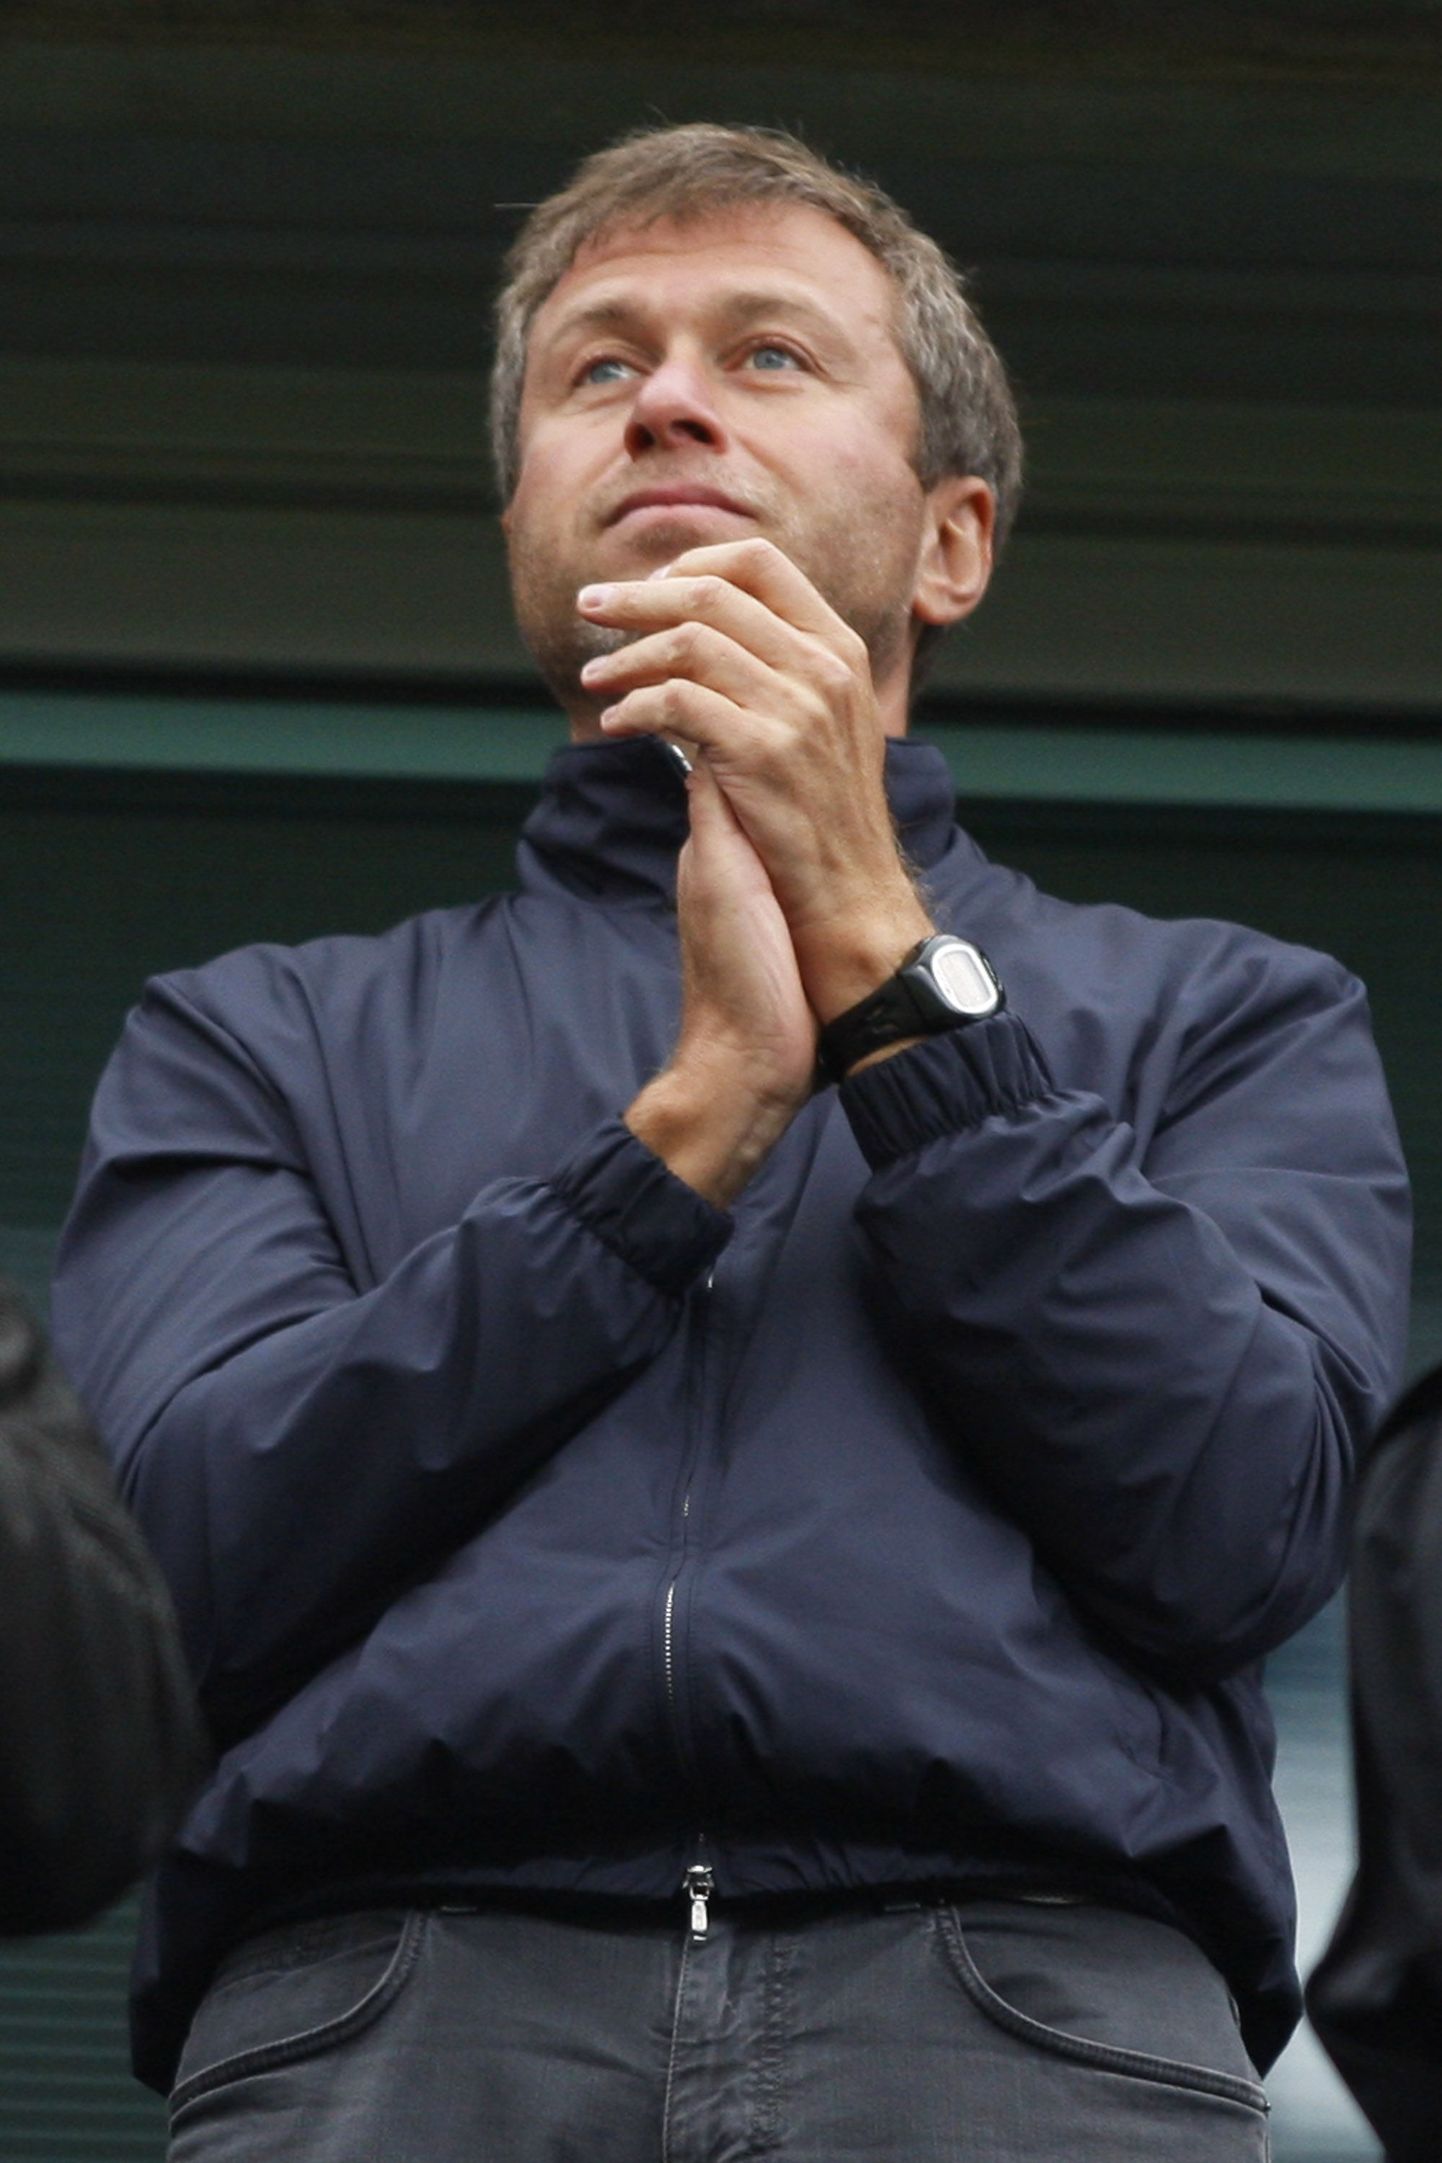 Chelsea's owner Roman Abramovich reacts as the team parade around the ground at the end of their English Premier League soccer match against Blackburn Rovers at Stamford Bridge, London, Sunday, May 17, 2009. (AP Photo/Sang Tan) ** NO INTERNET/MOBILE USAGE WITHOUT FOOTBALL ASSOCIATION PREMIER LEAGUE (FAPL) LICENCE - CALL +44 (0)20 7864 9121 or EMAIL info@football-dataco.com FOR DETAILS ** / SCANPIX Code: 436